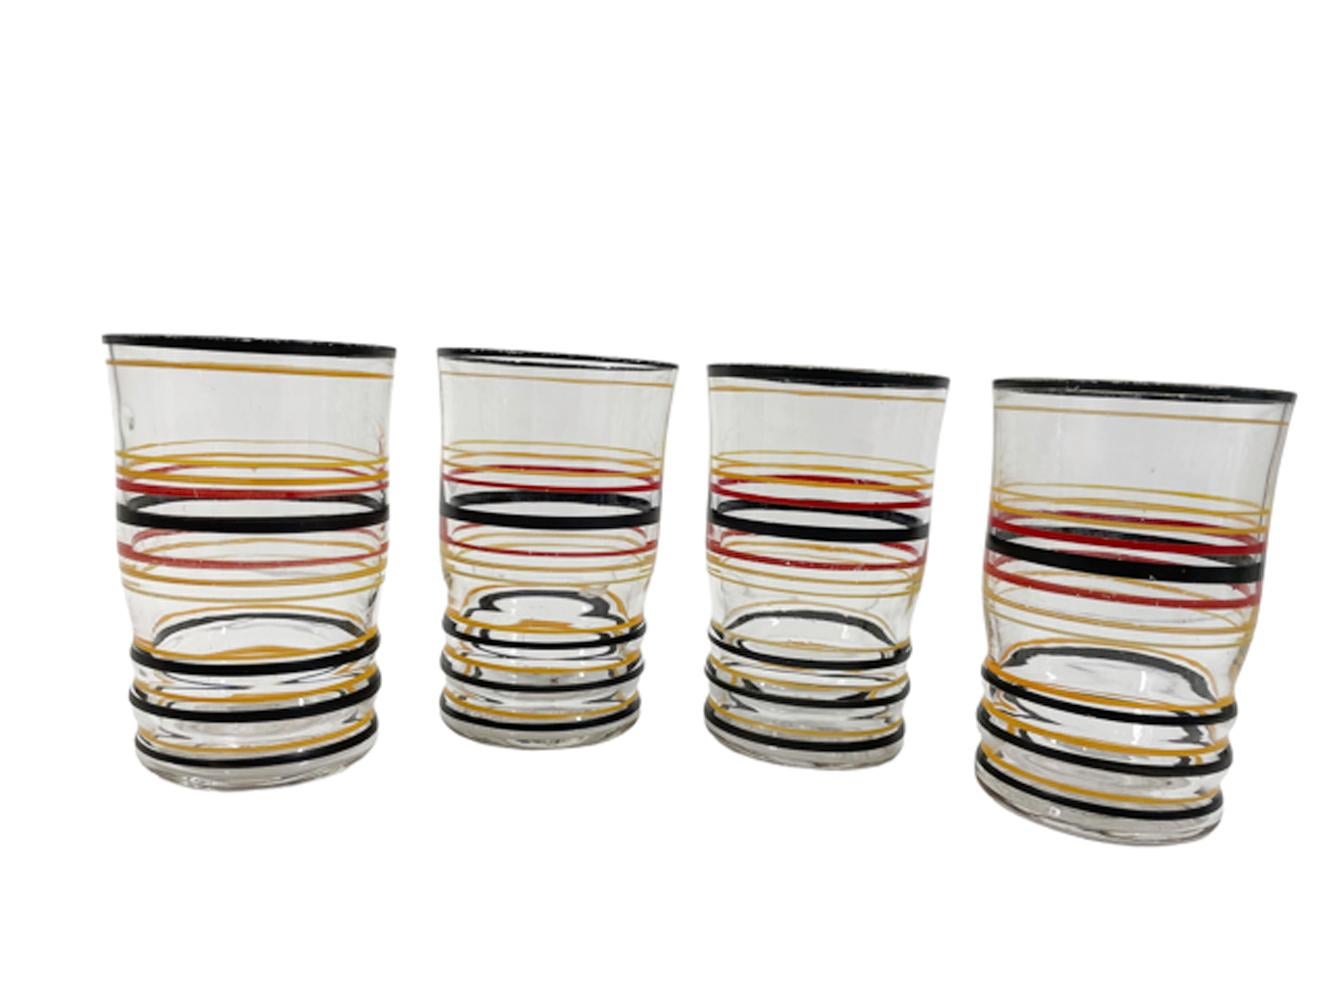 Art Deco cocktail shaker and glasses of clear optically ribbed glass with molded rings and hand painted rings in black, red, orange and yellow. The shaker with a domed aluminum lid and cap with a strainer in the lid.